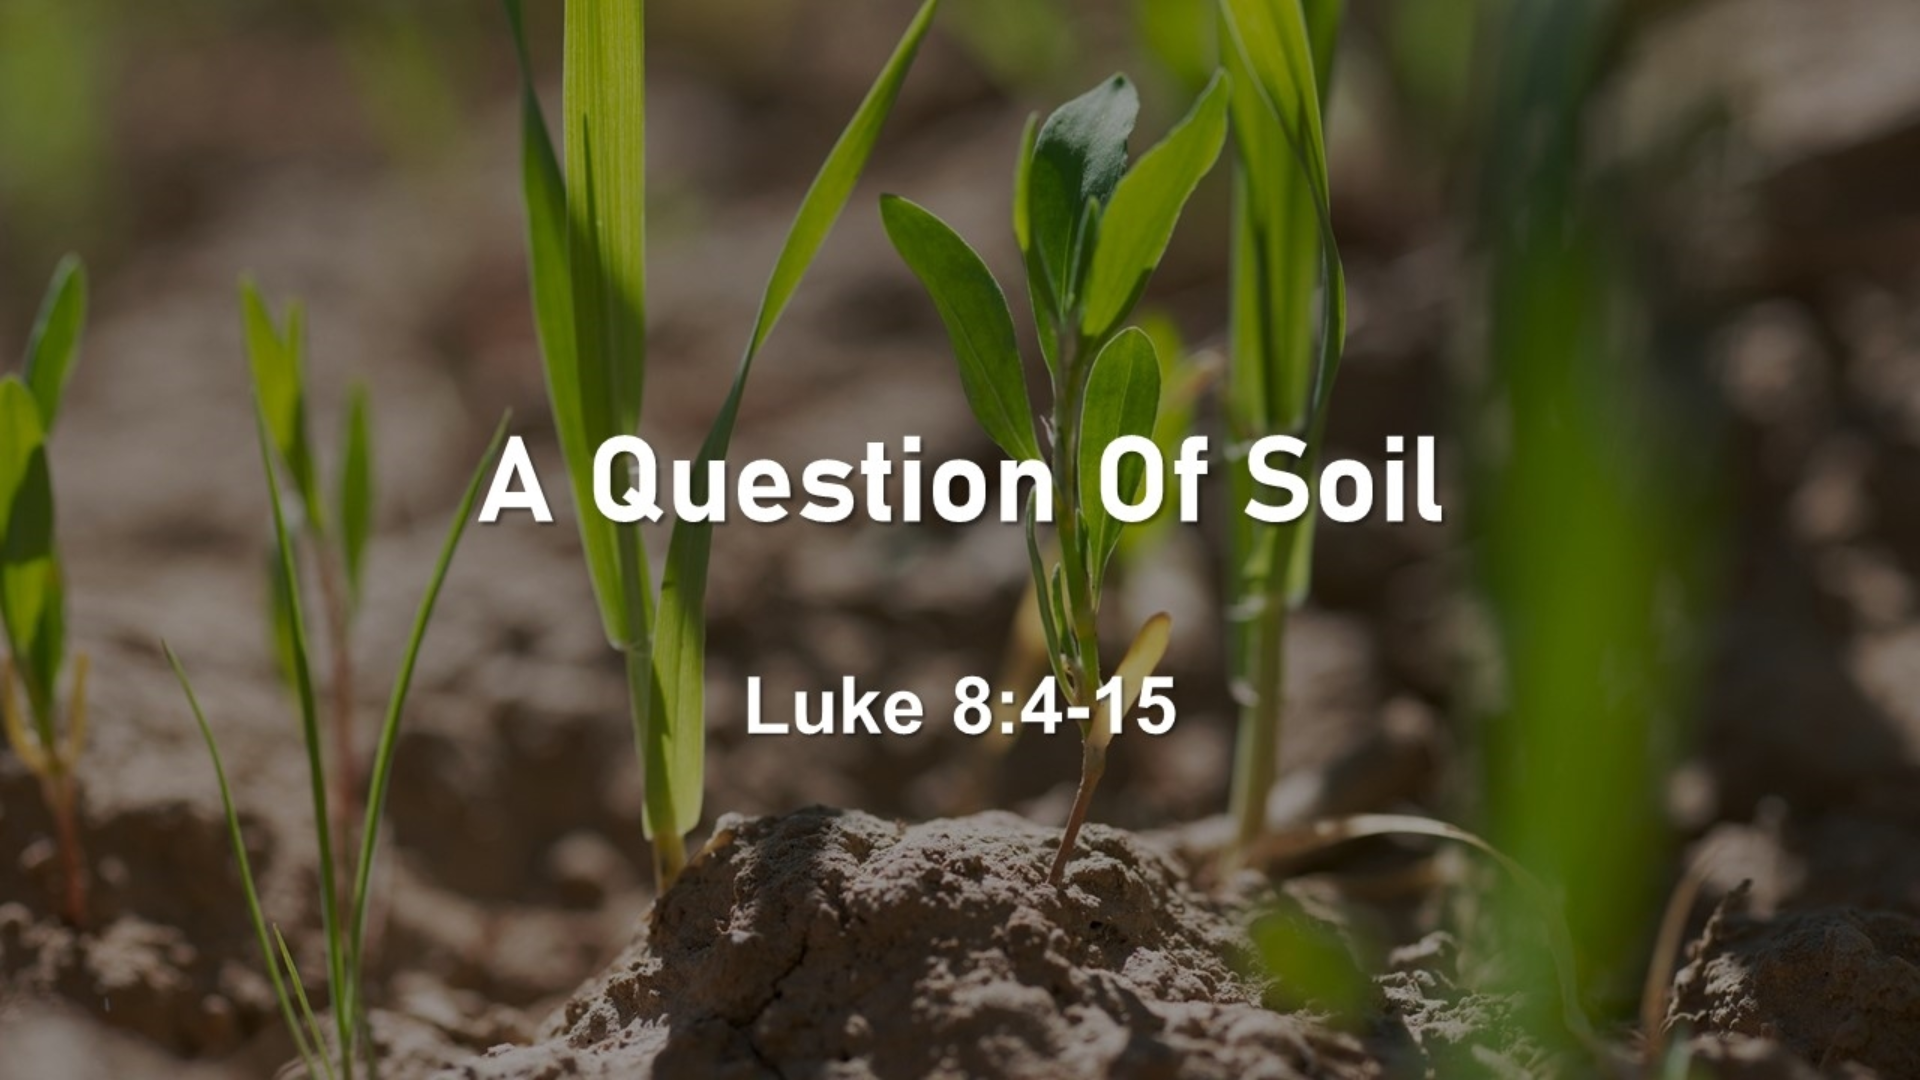 A Question of Soil